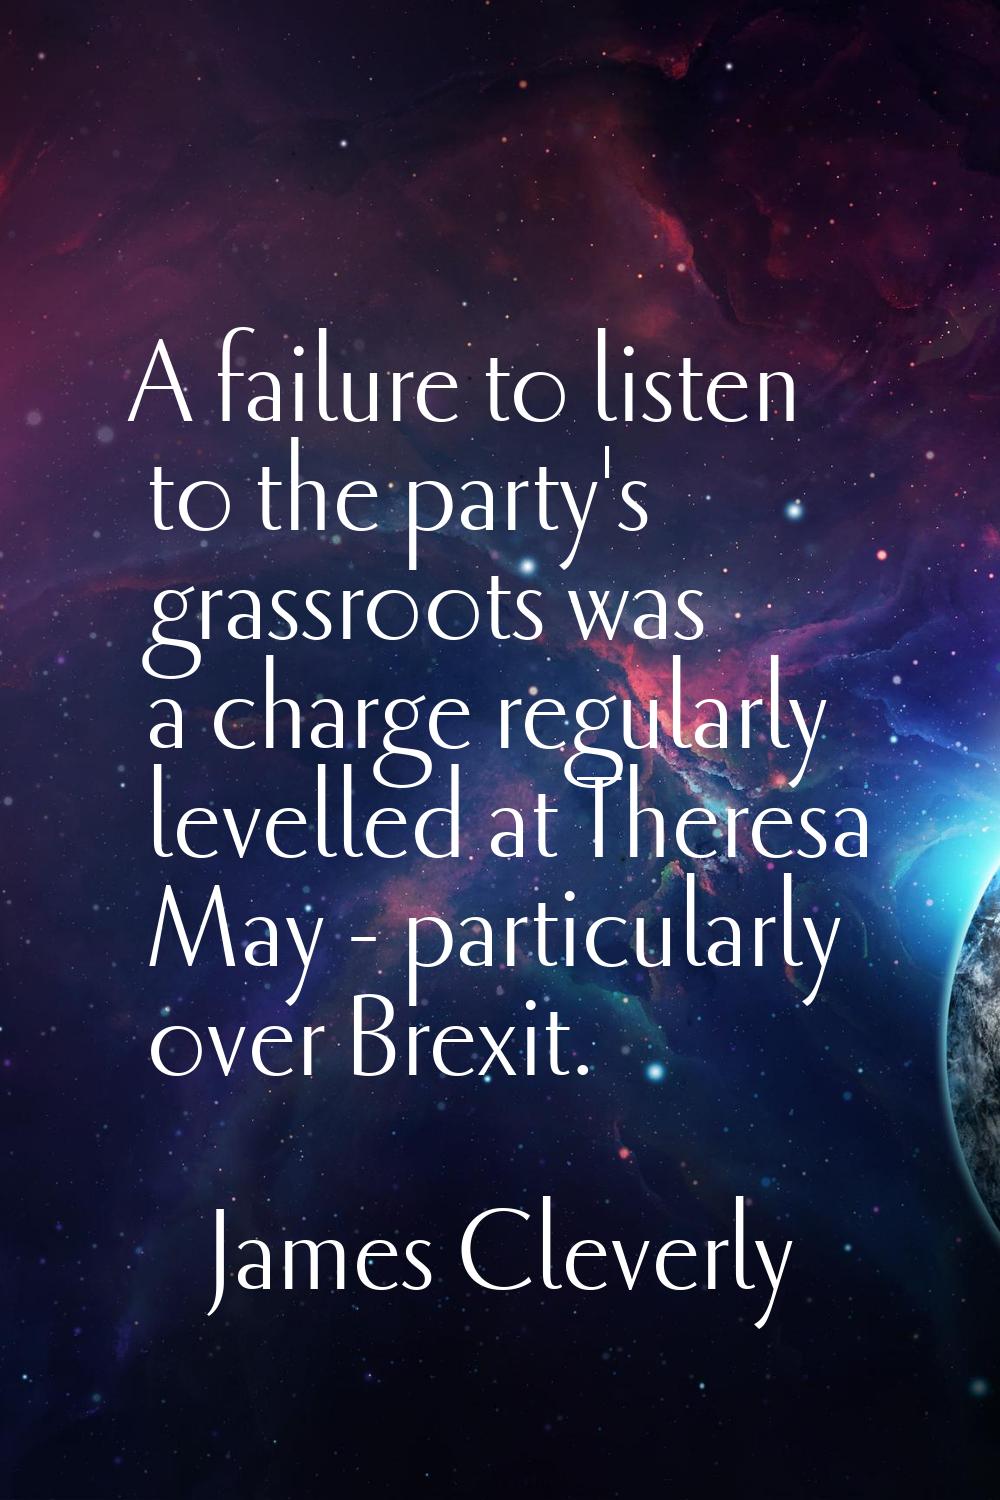 A failure to listen to the party's grassroots was a charge regularly levelled at Theresa May - part